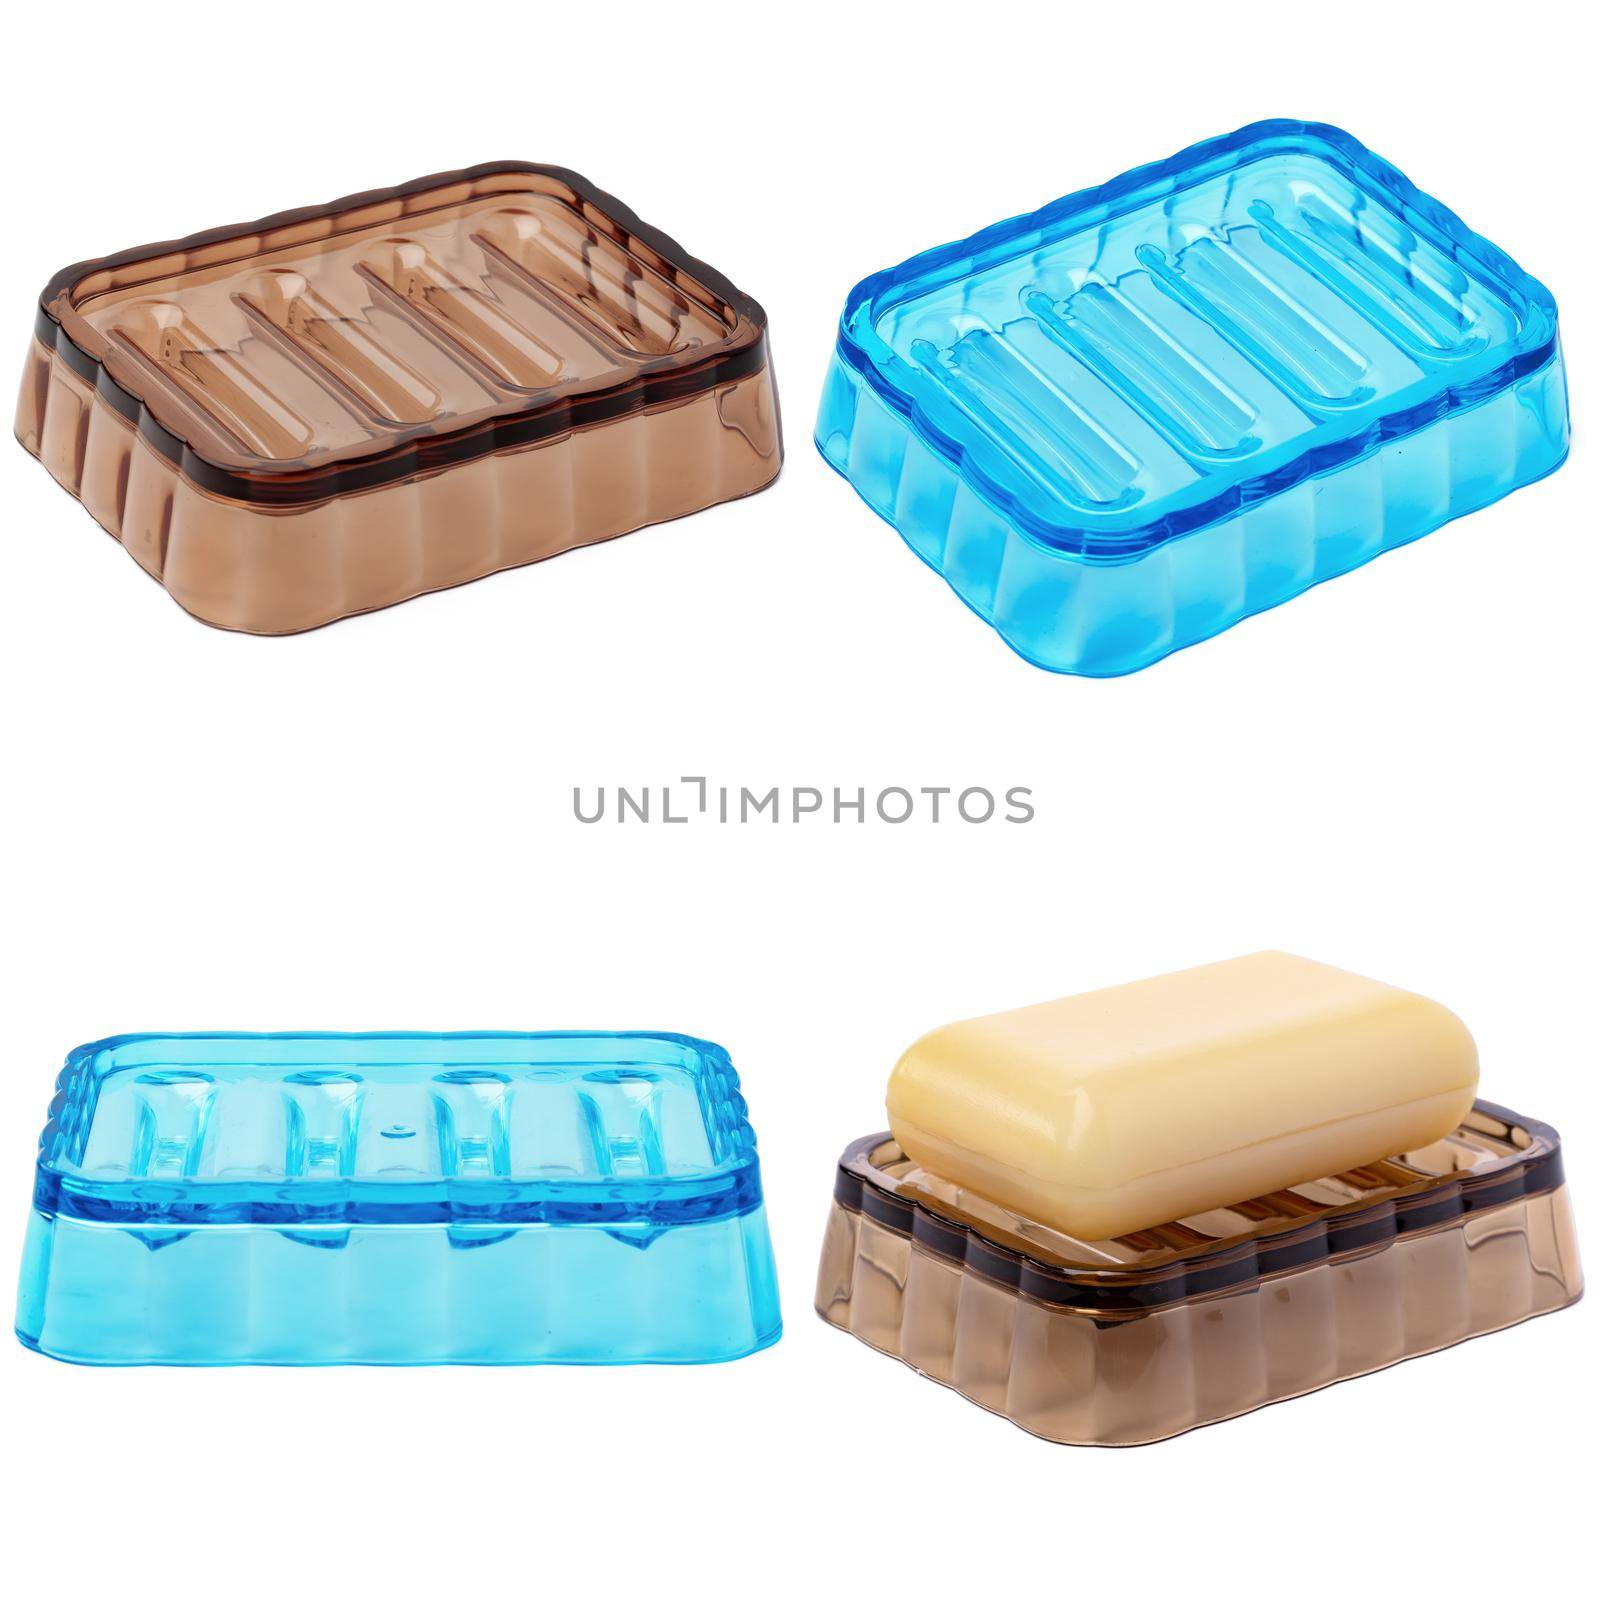 Plastic soap boxes on a white background by Fabrikasimf